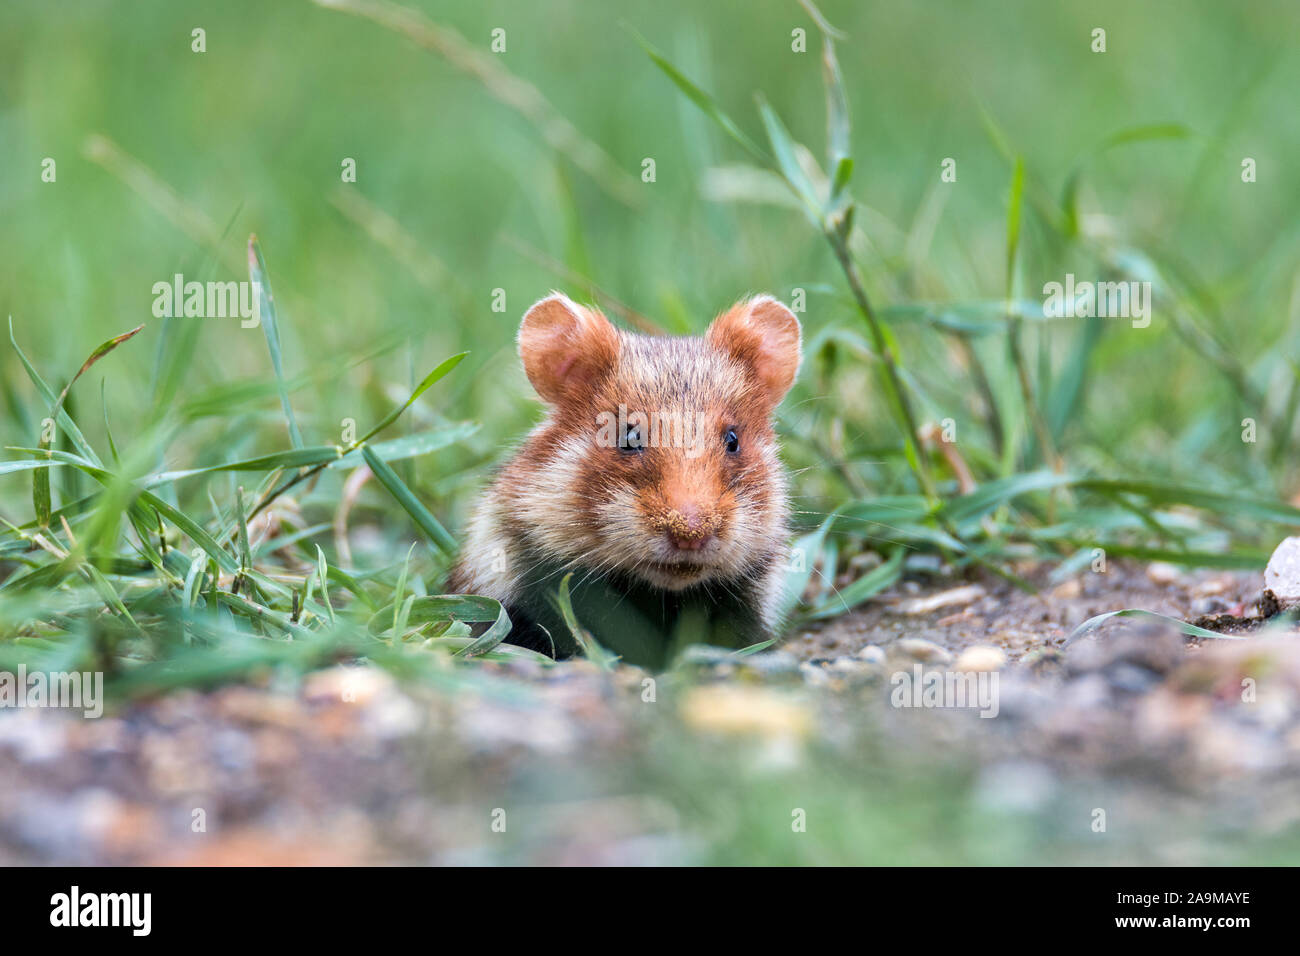 Feldhamster (Cricetus cricetus) Grand hamster Banque D'Images